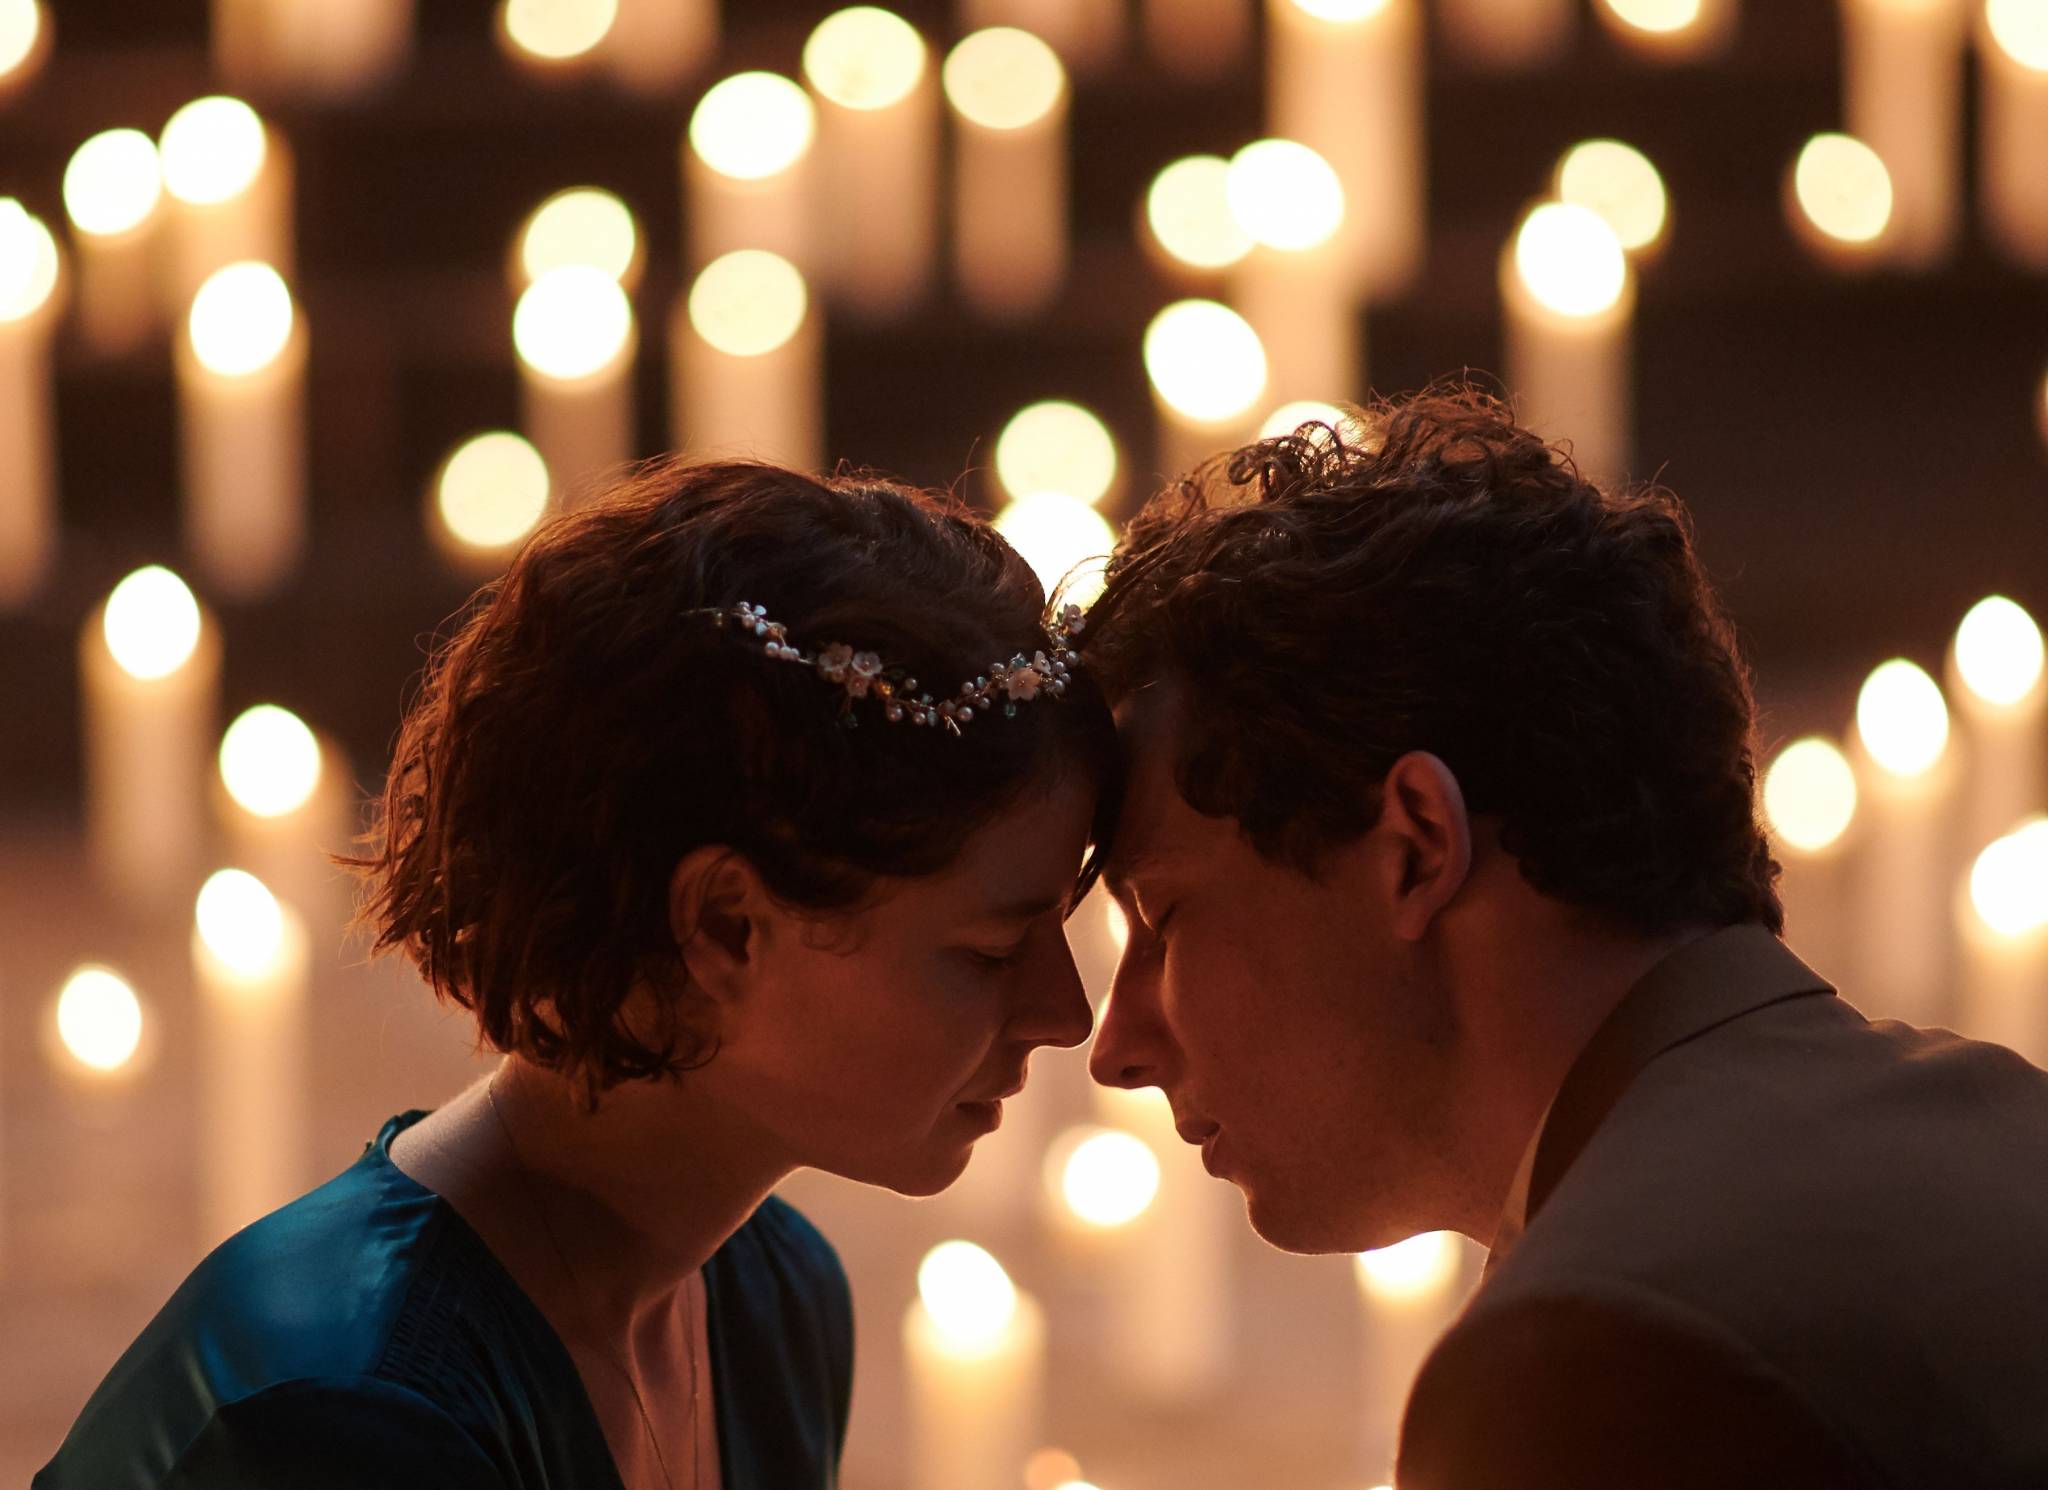 National Theatre’s critically acclaimed film of Romeo and Juliet to be